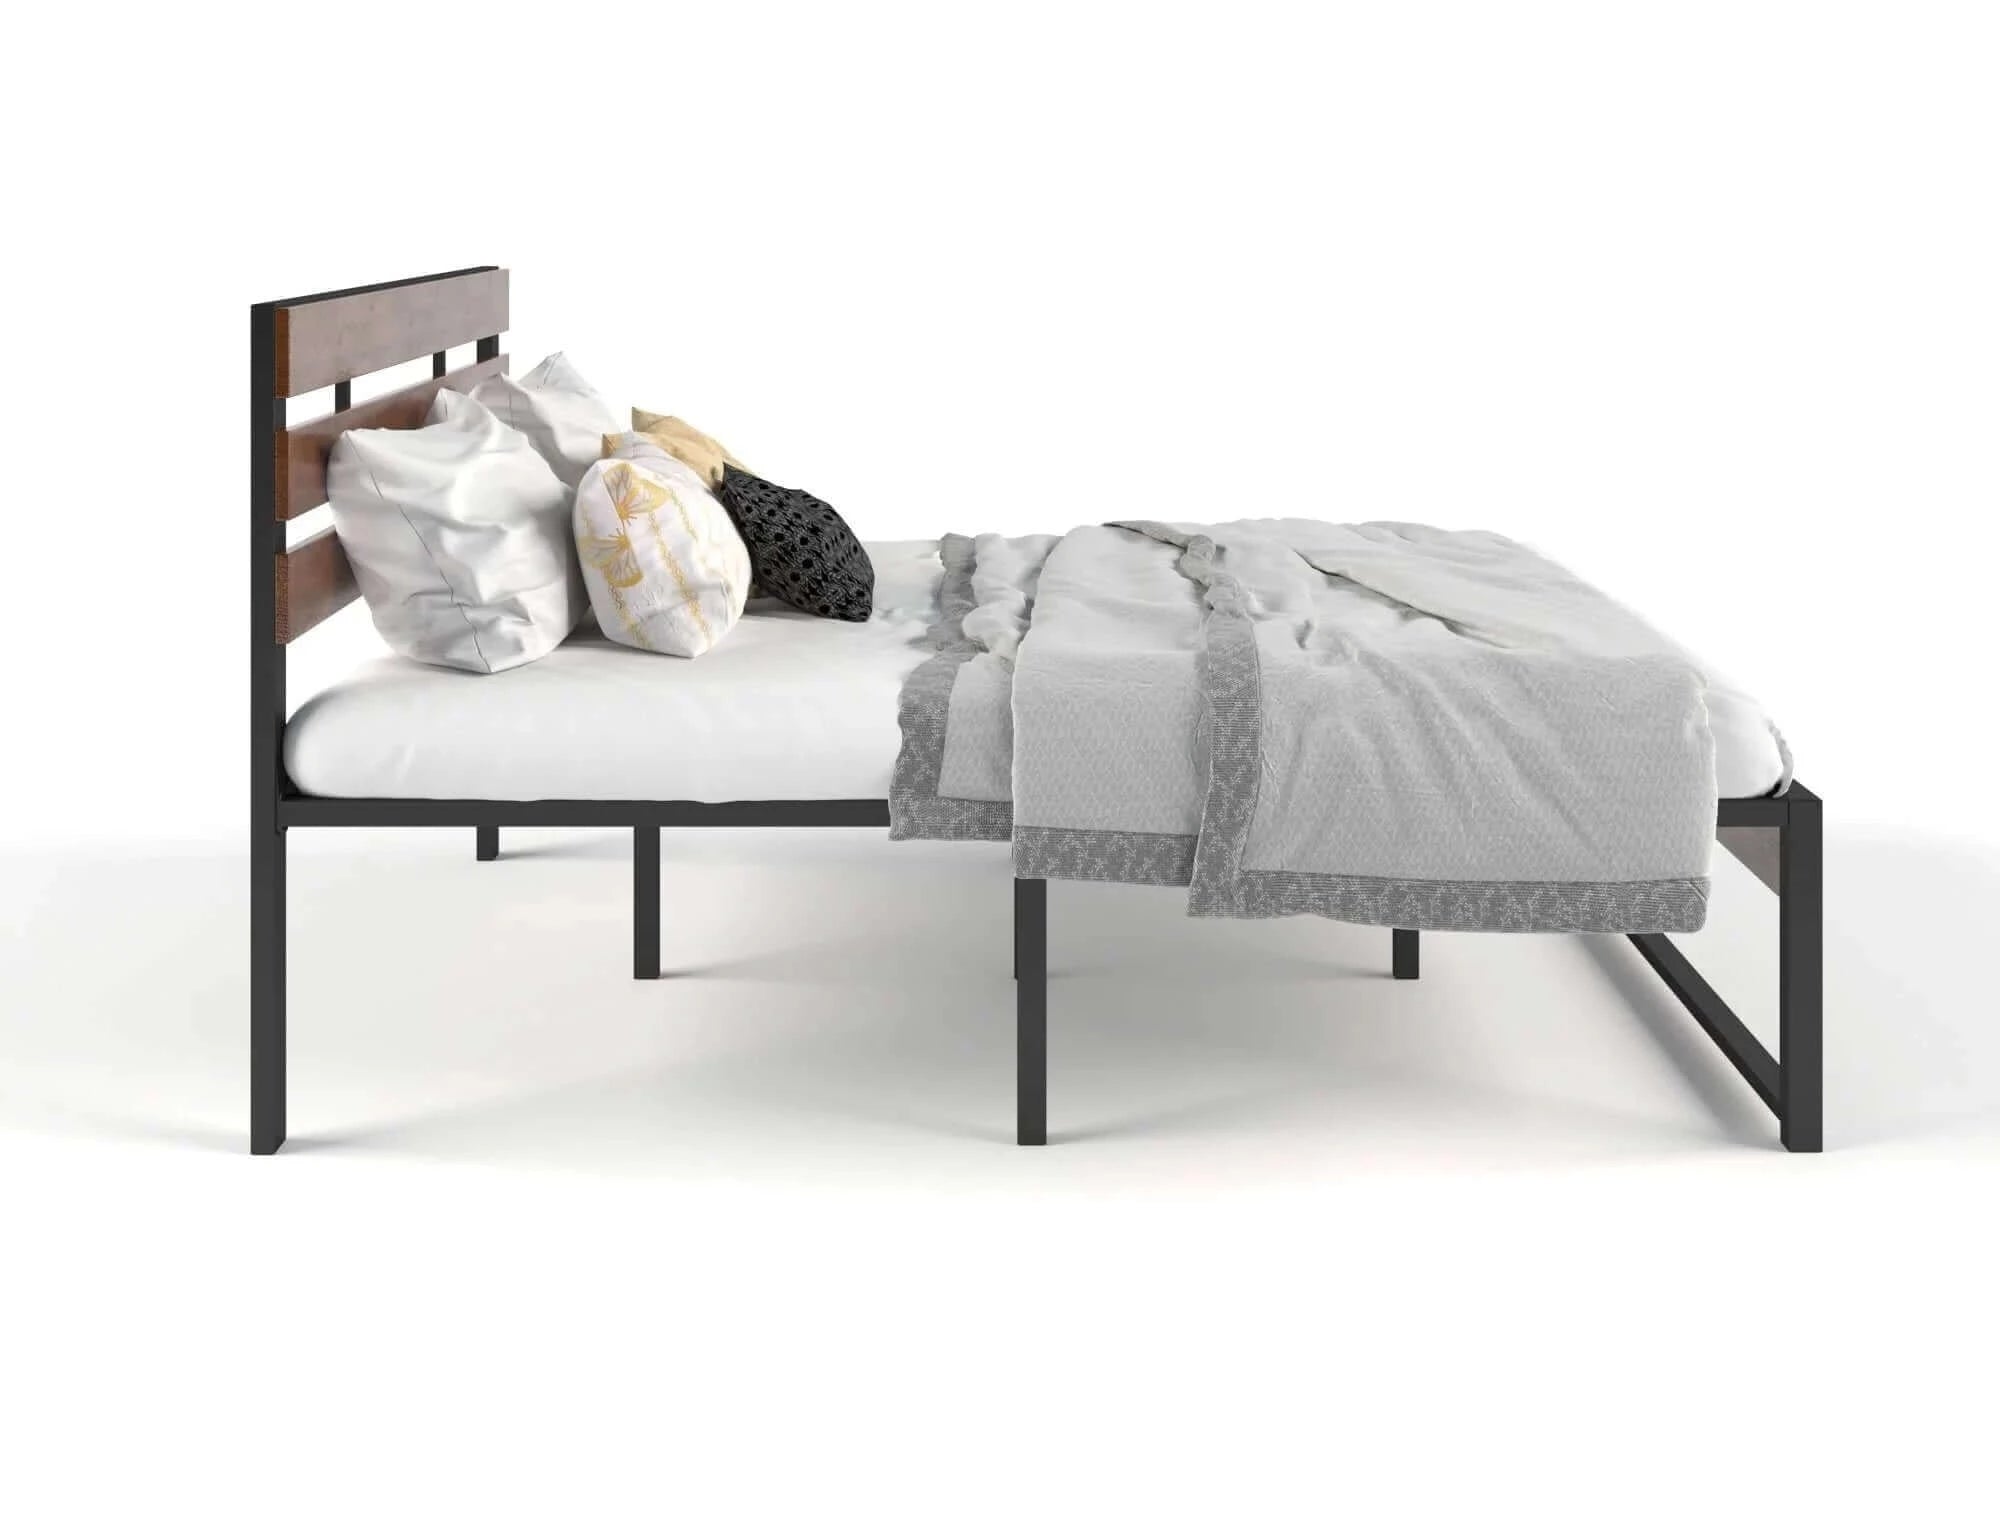 Buy ora wooden and metal bed frame double - upinteriors-Upinteriors